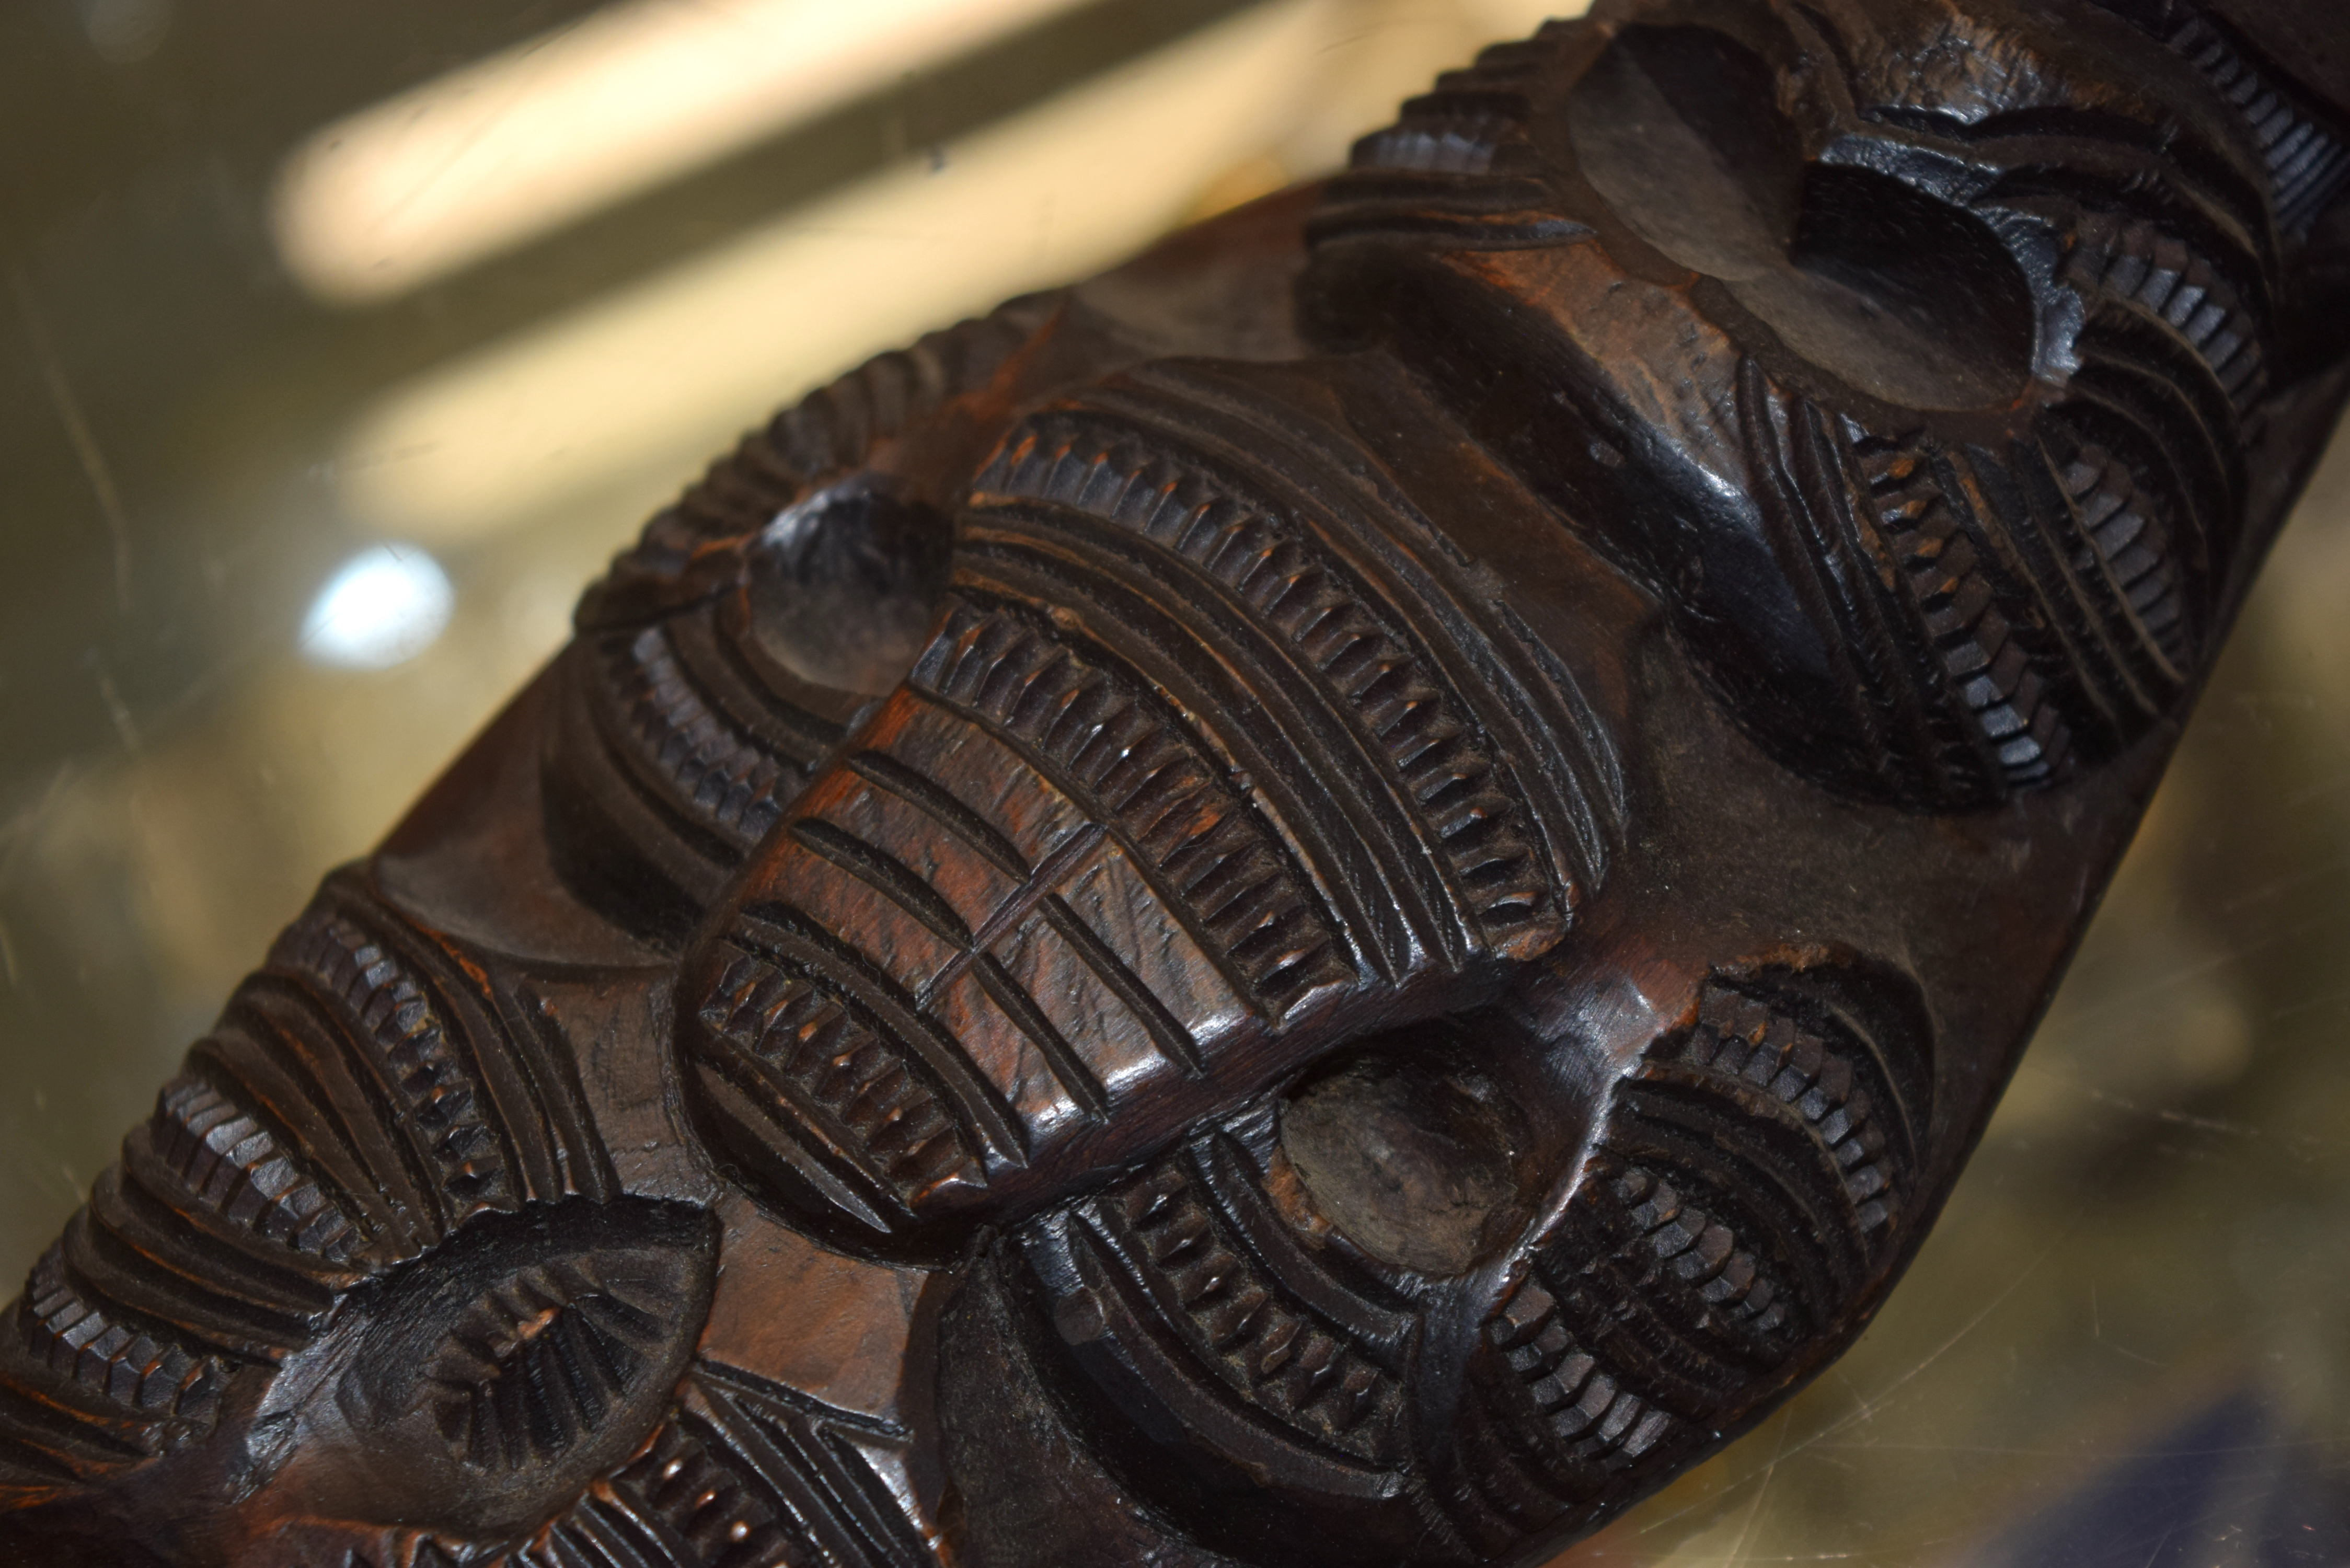 AN UNUSUAL EARLY 20TH CENTURY MAORI TRIBAL NEW ZEALAND CARVED WOOD CLUB possibly a Wahaiki, with fla - Image 15 of 22